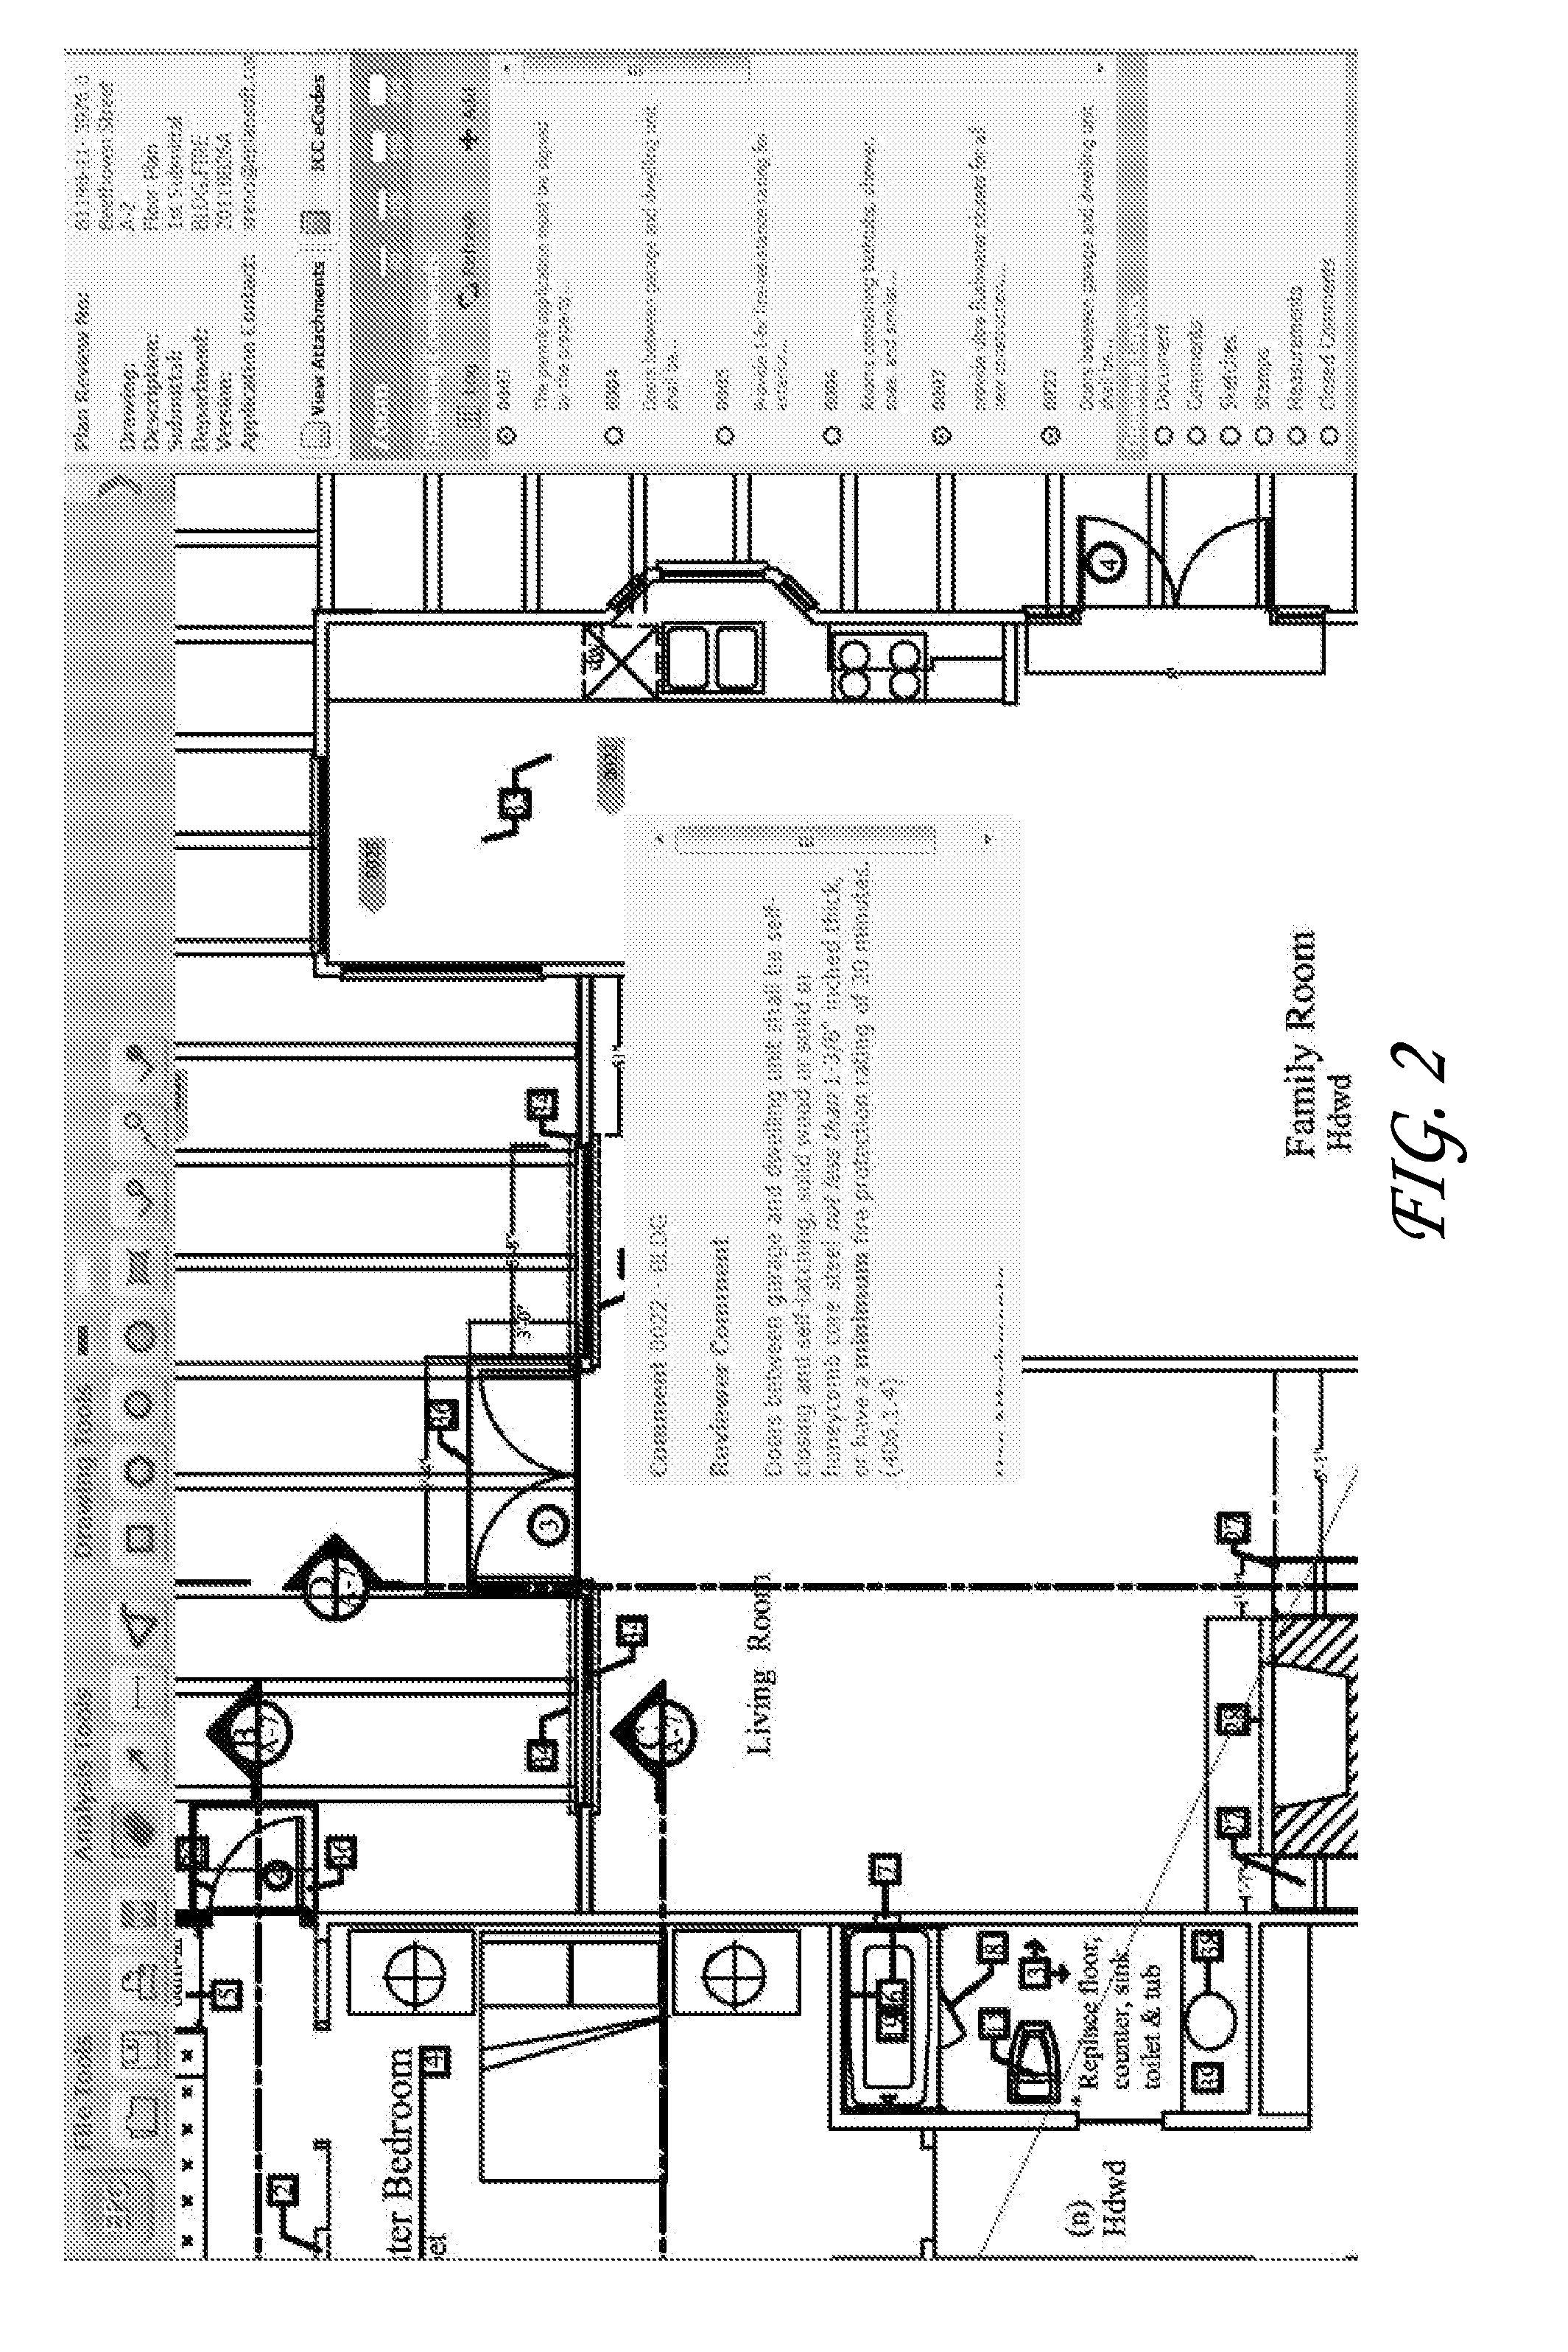 Systems and methods for management and processing of electronic documents